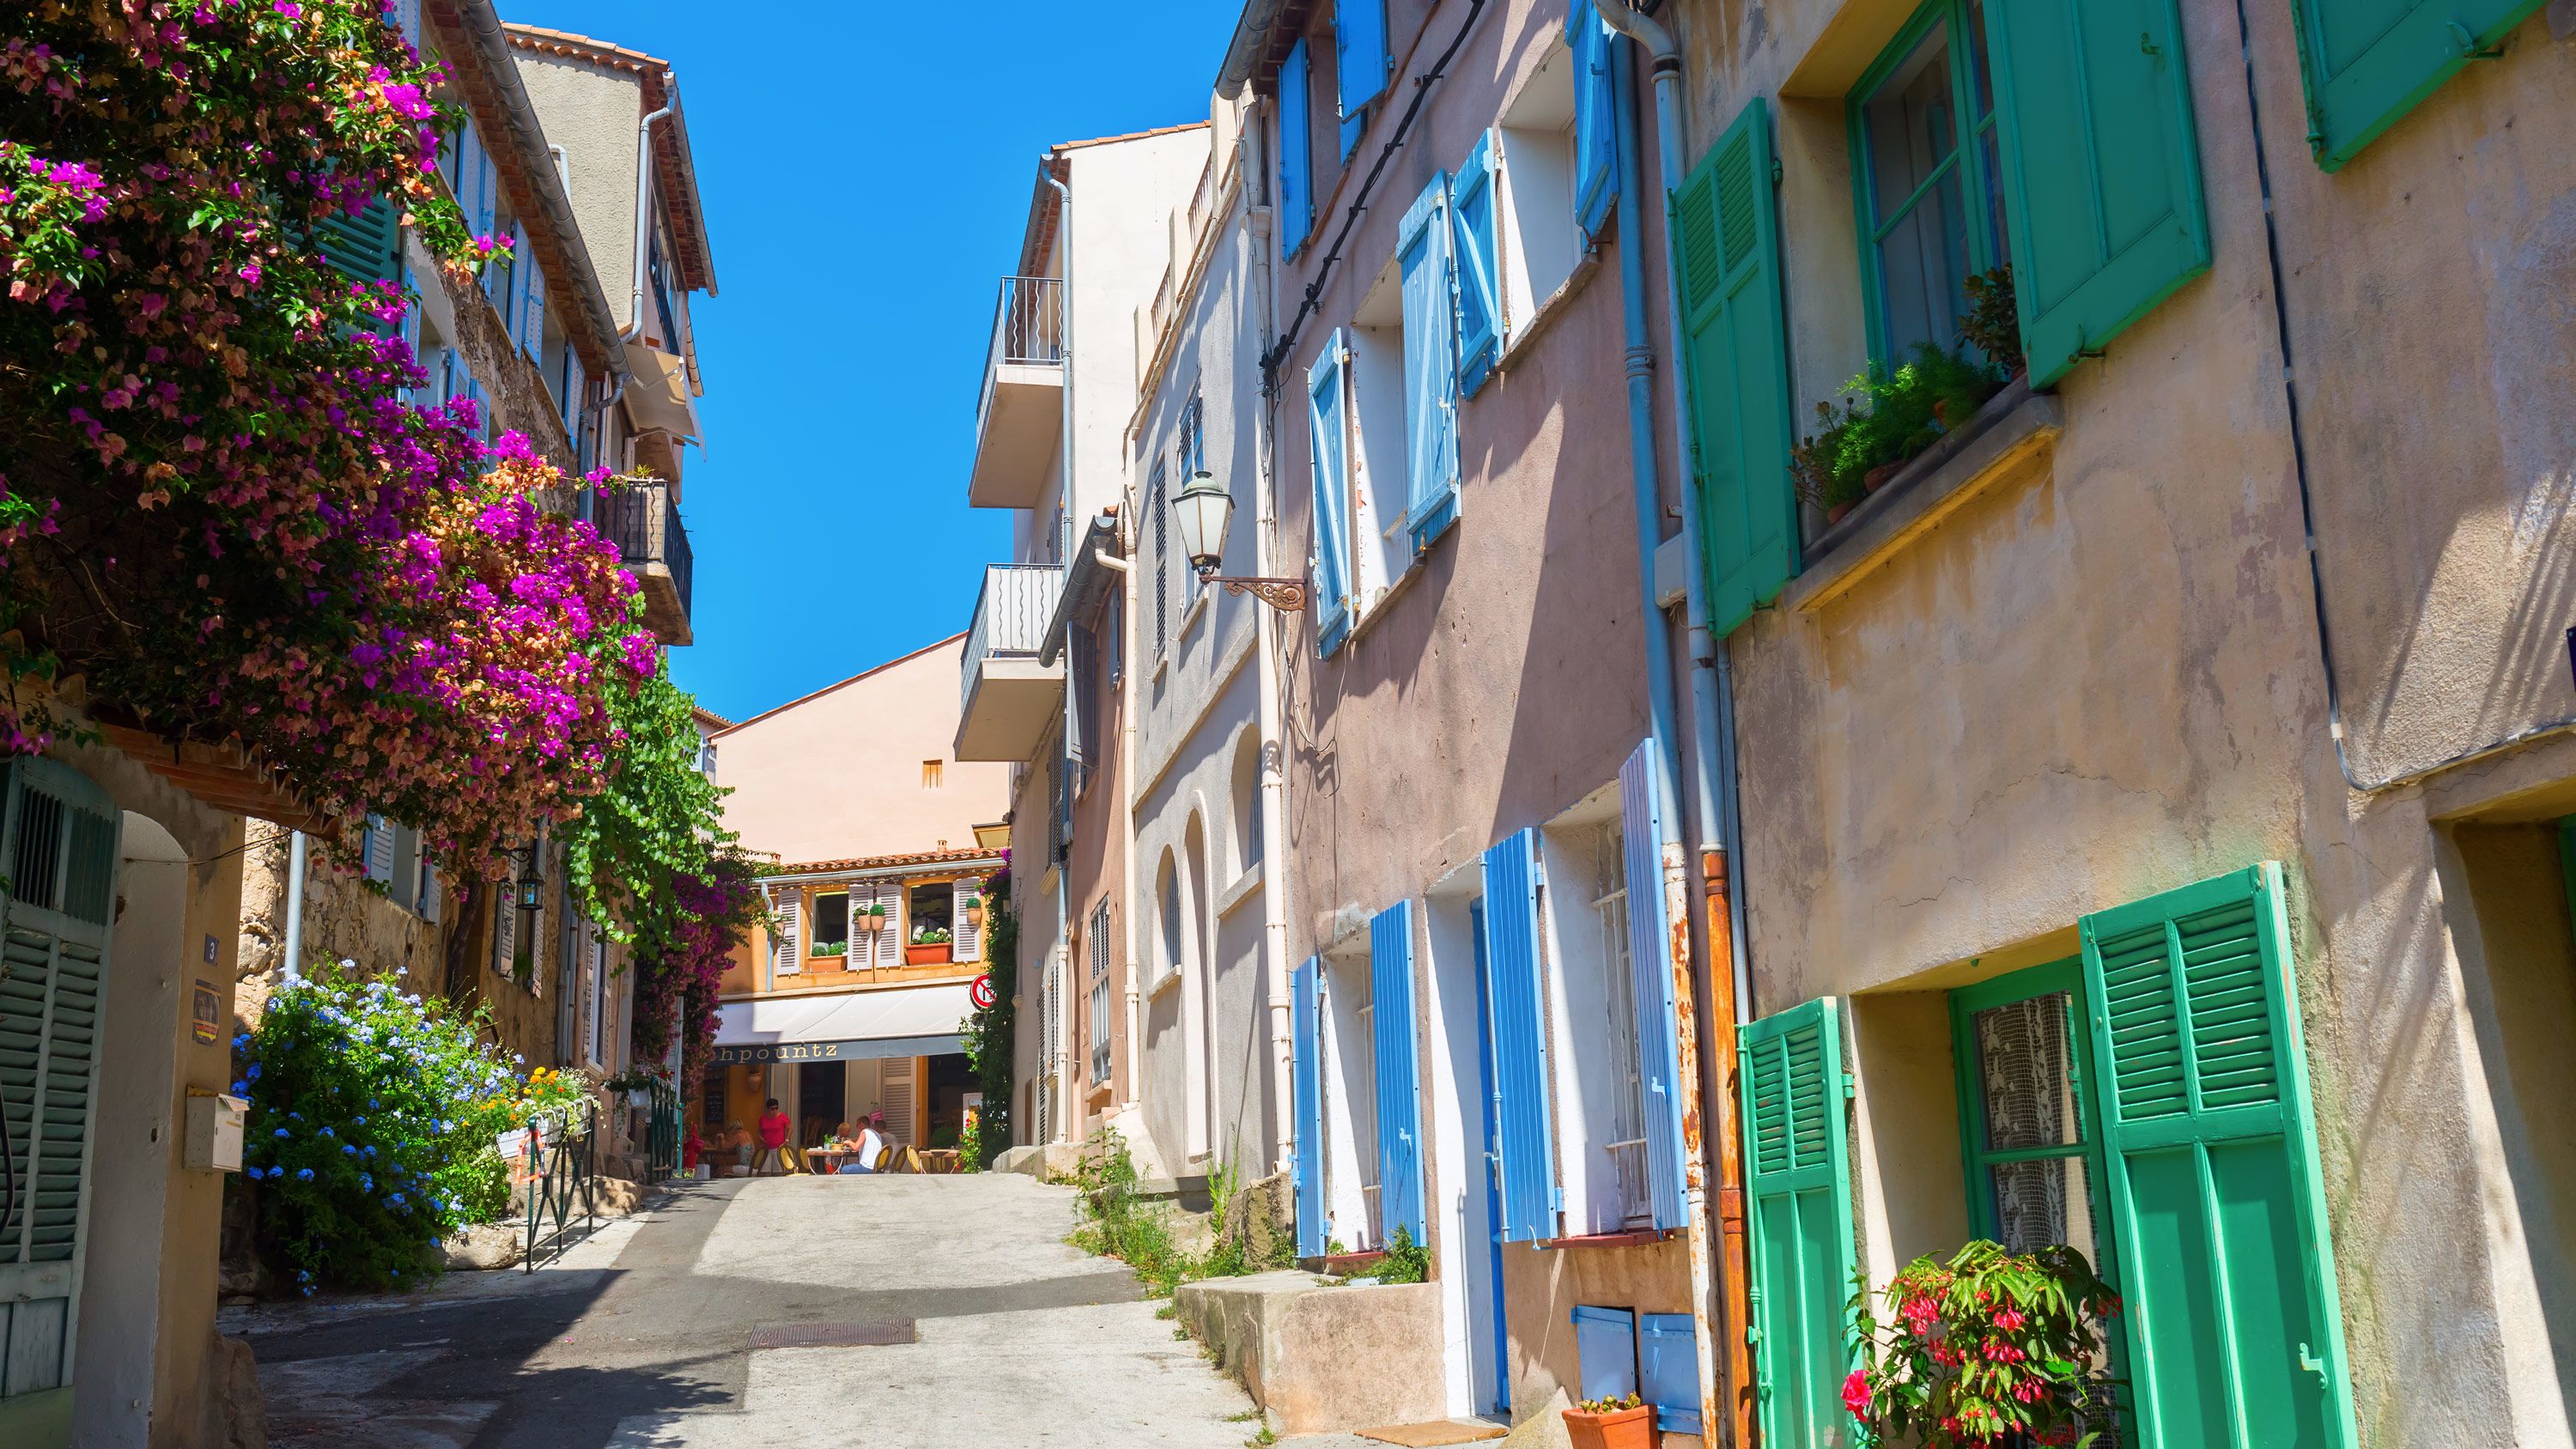 St Tropez - What to See, Eat and Do in the beautiful Cote d'Azur